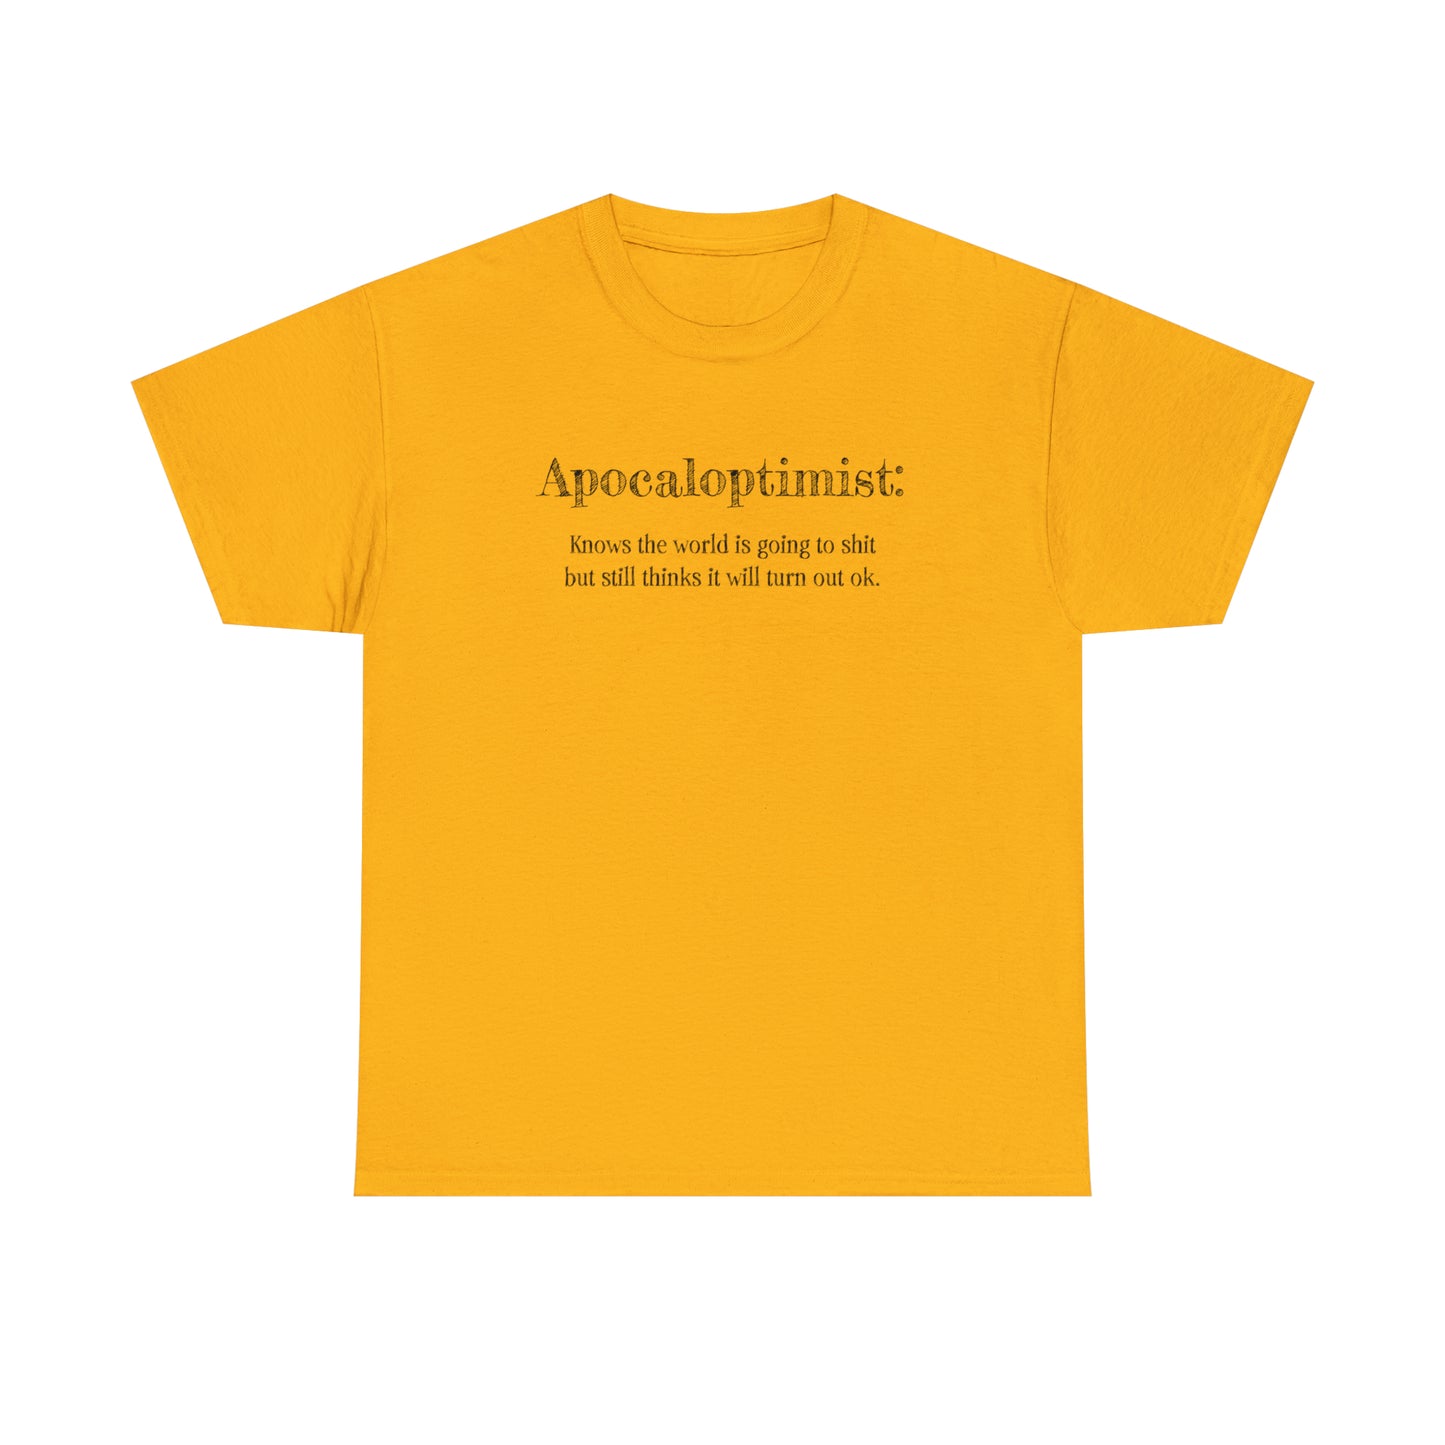 Apocaloptimist T-Shirt For Optimistic TShirt For Funny Apocalypse T Shirt For End Of The World Shirt For Zombie Apocalypse Shirt For Optimistic Gift